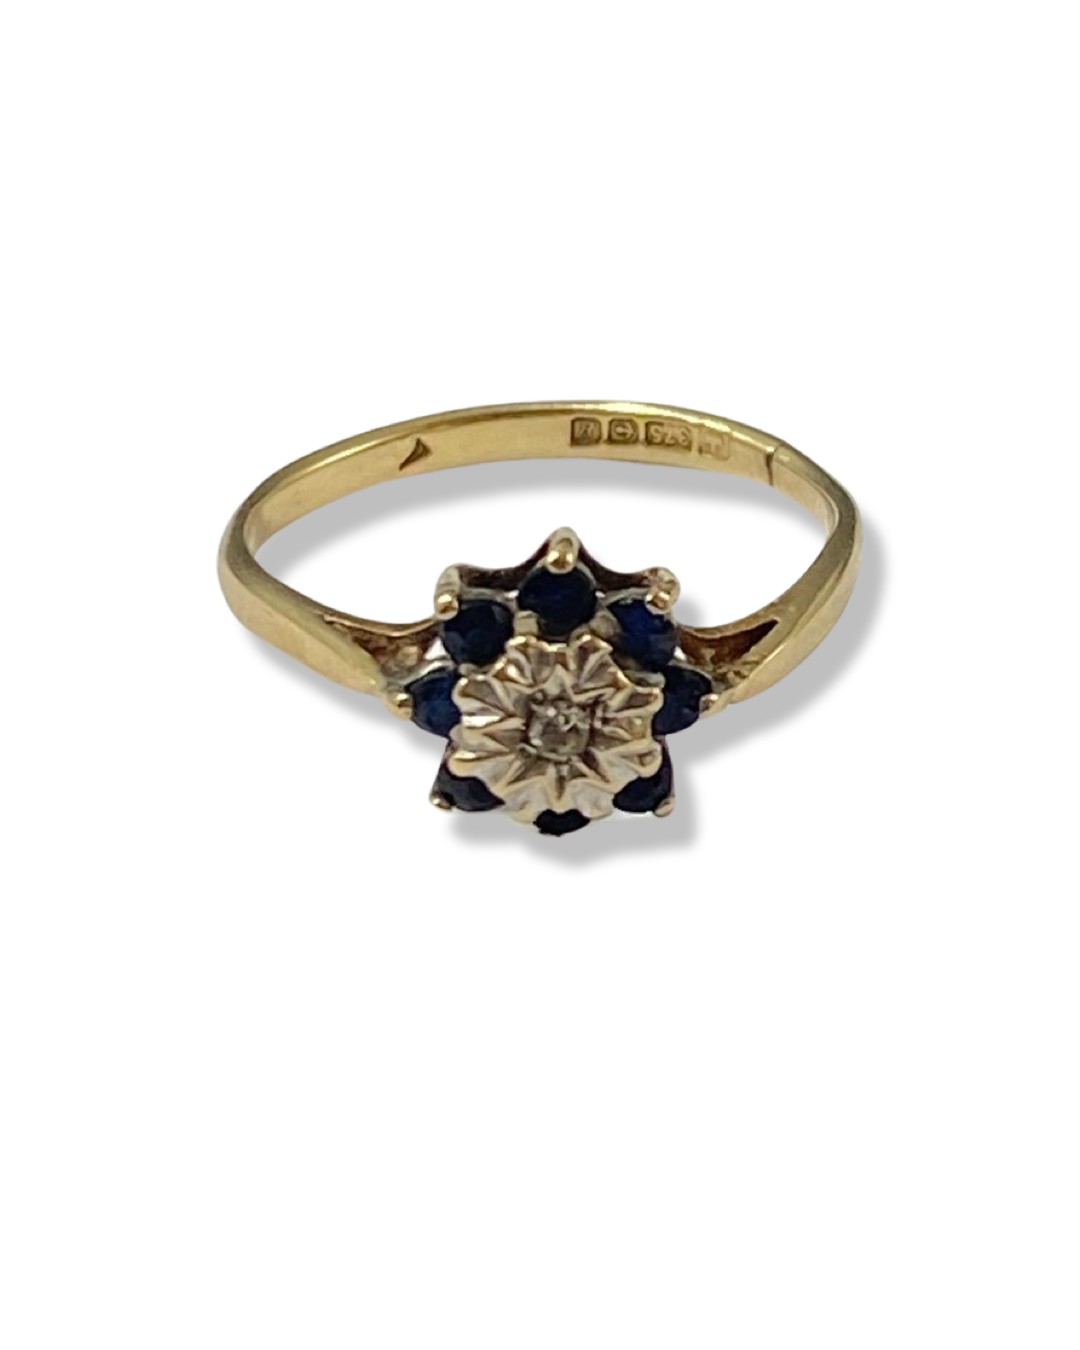 9ct yellow gold diamond and sapphire cluster ring weighing 1.22 grams size H